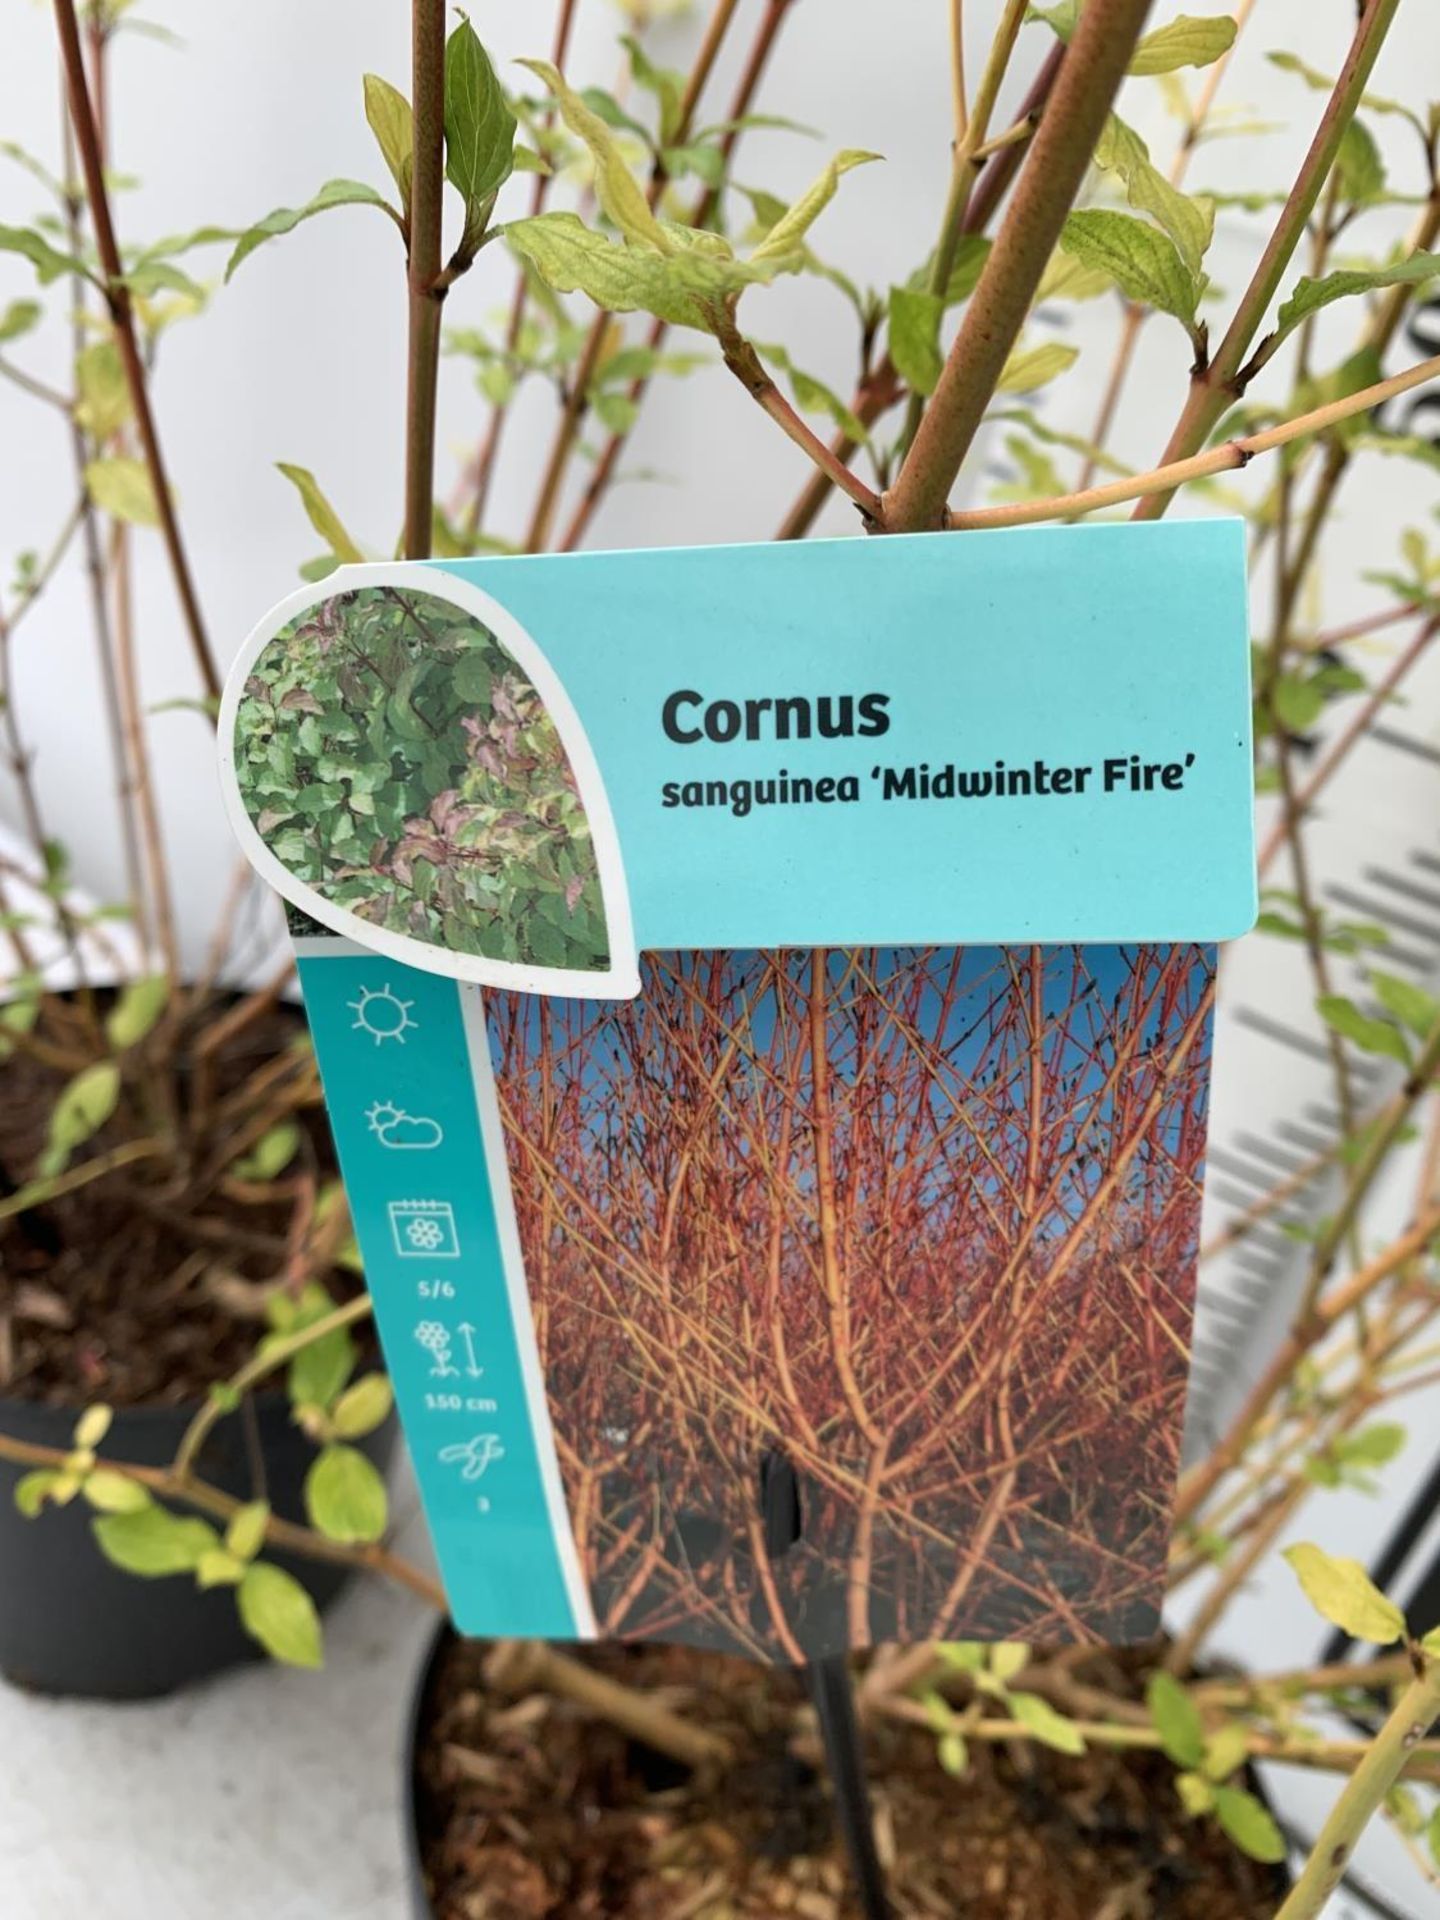 TWO CORNUS SANGUINEA 'MIDWINTER FIRE' IN 4 LTR POTS APPROX 90CM IN HEIGHT PLUS VAT TO BE SOLD FOR - Image 10 of 12